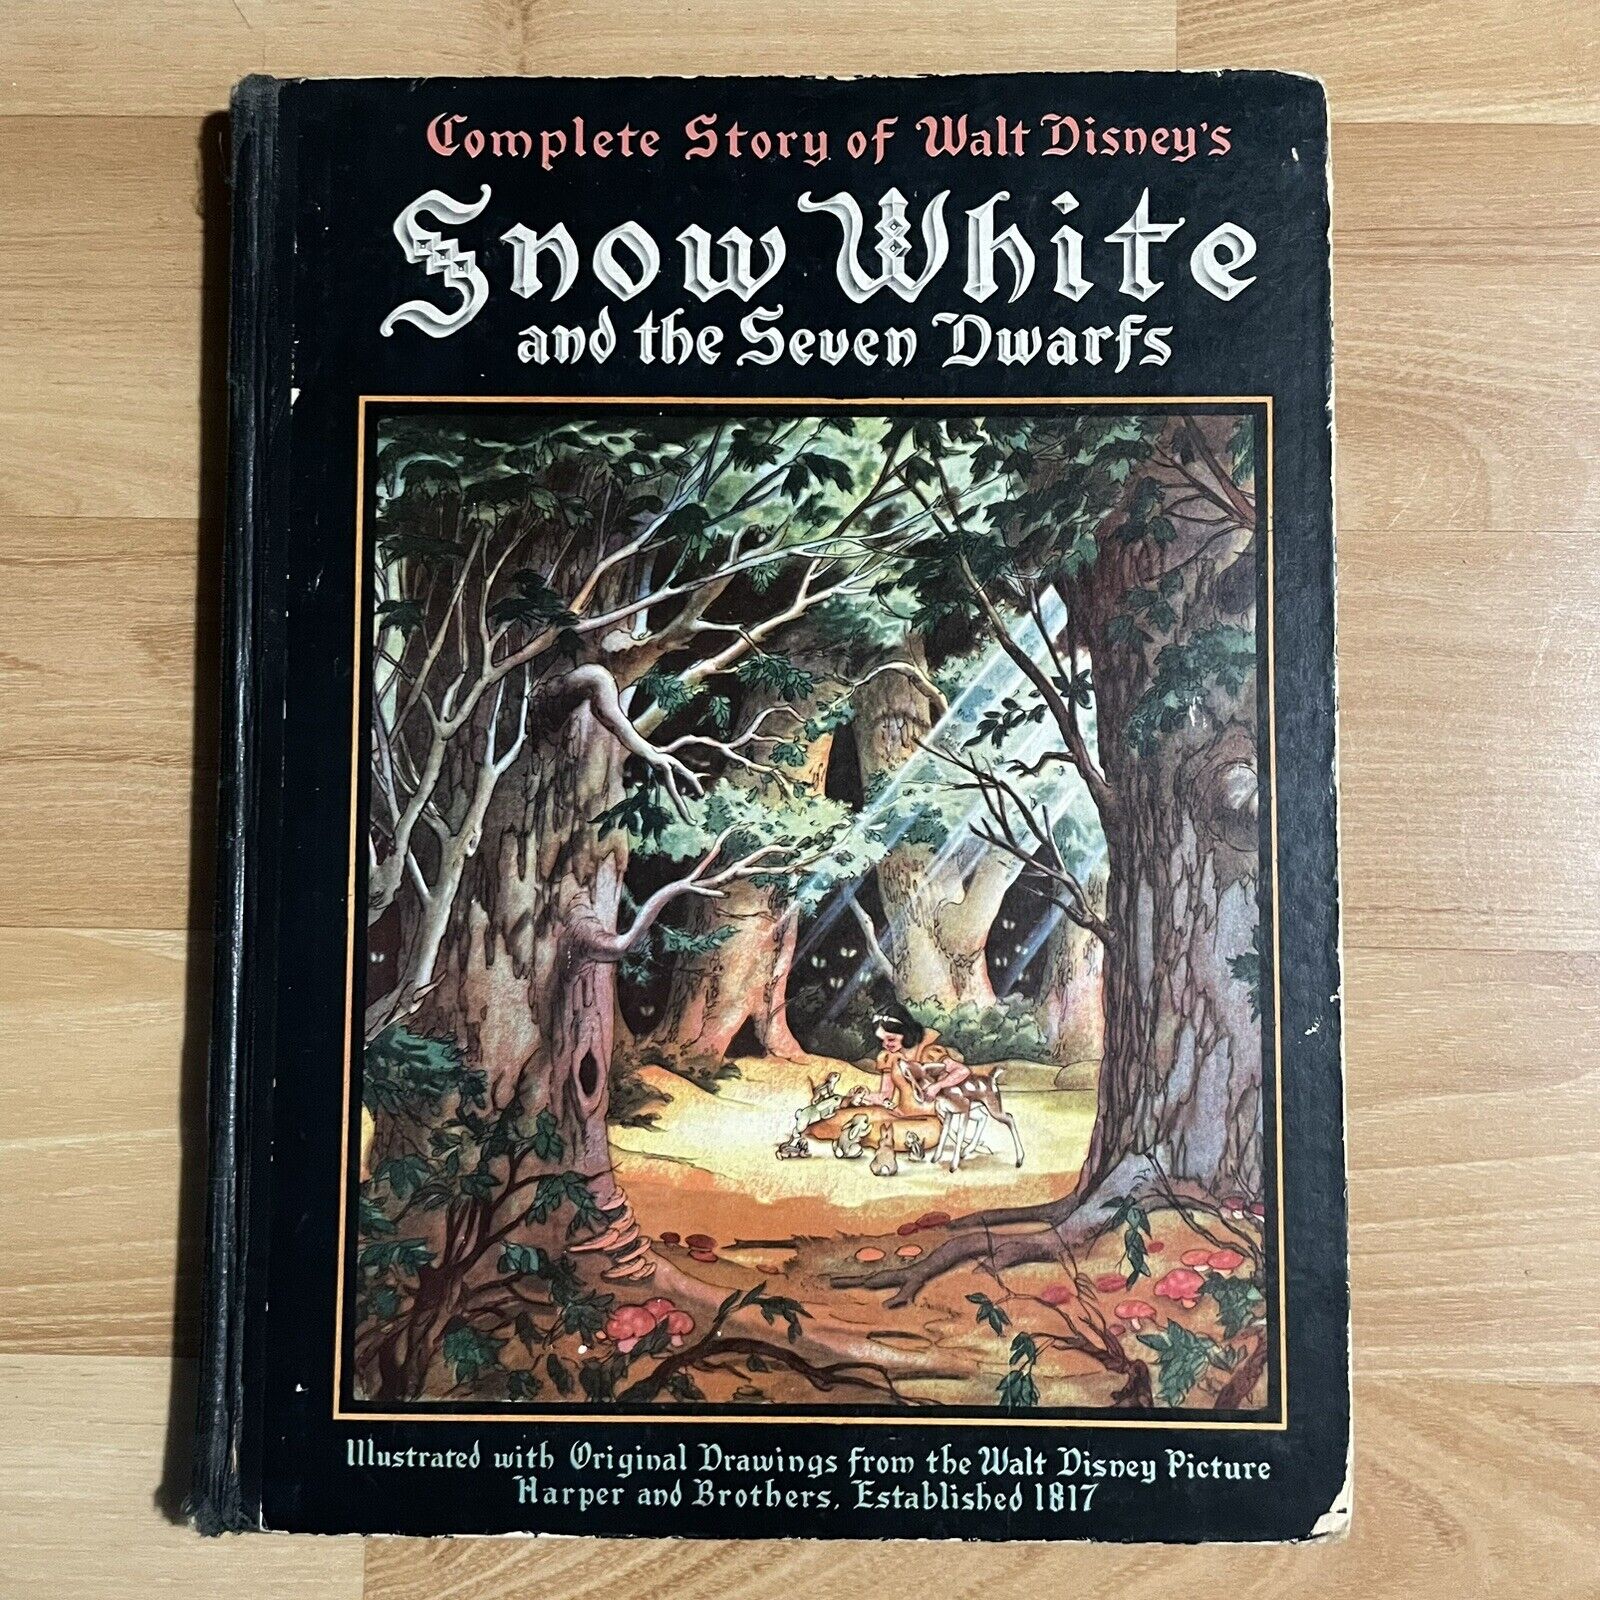 The Complete Story of Snow White and the Seven Dwarfs First Ed. 1st Print 1937